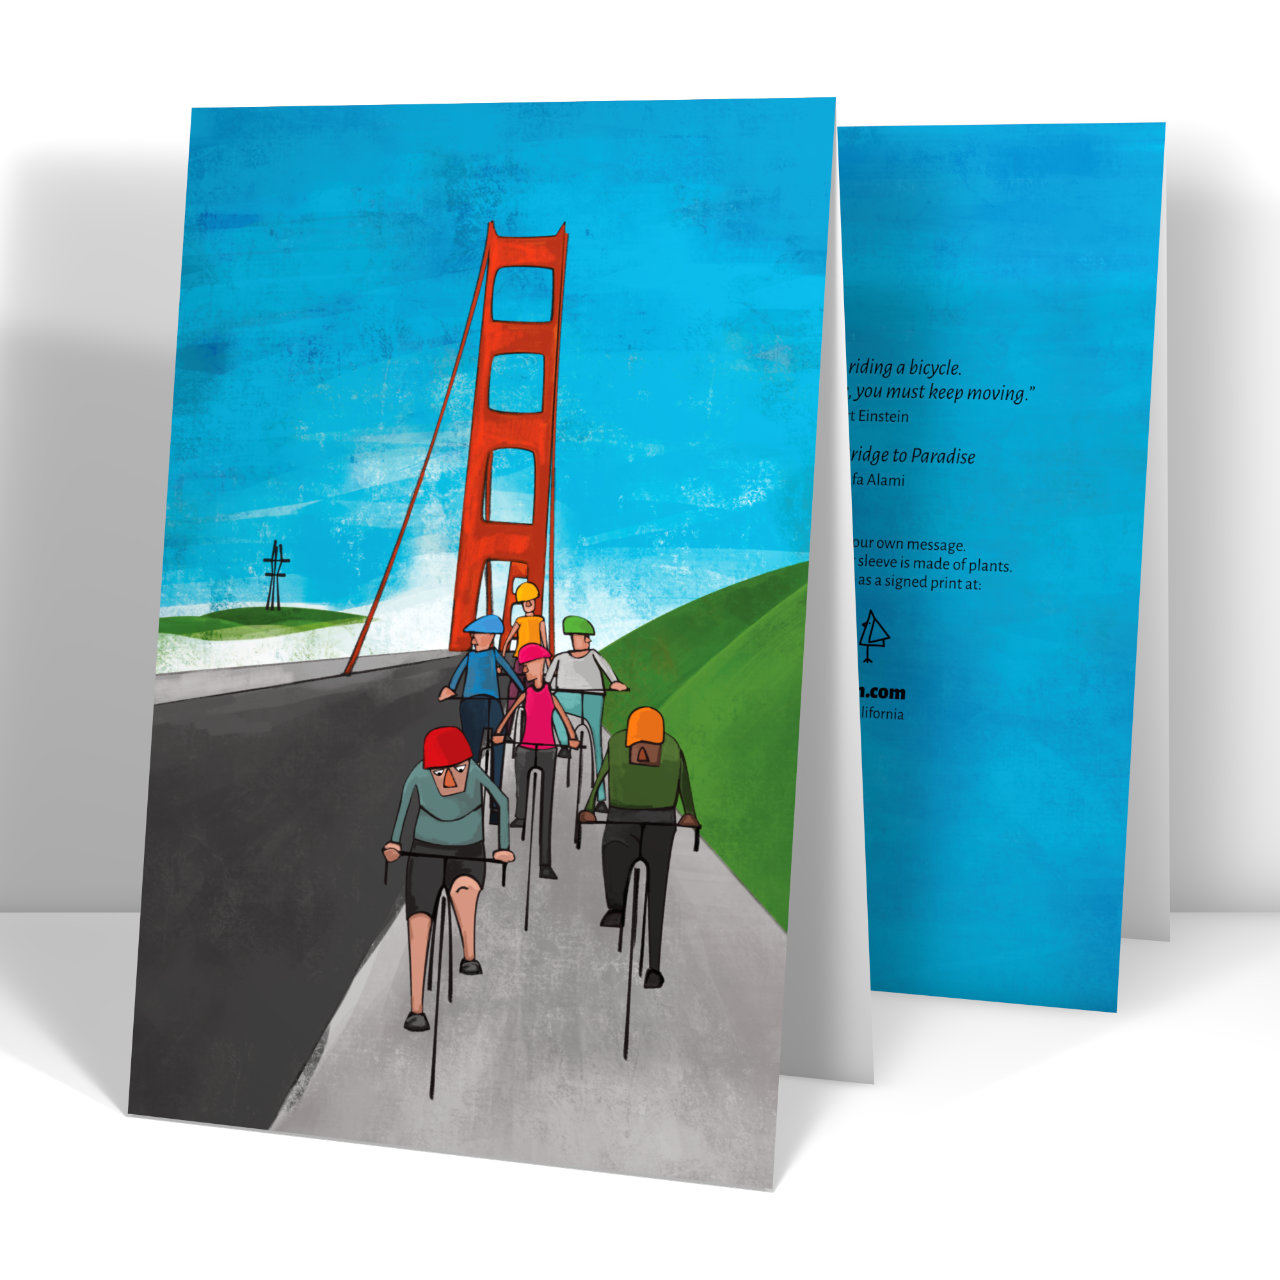 Painting of the San Francisco Golden Gate Bridge and Bicycle riders